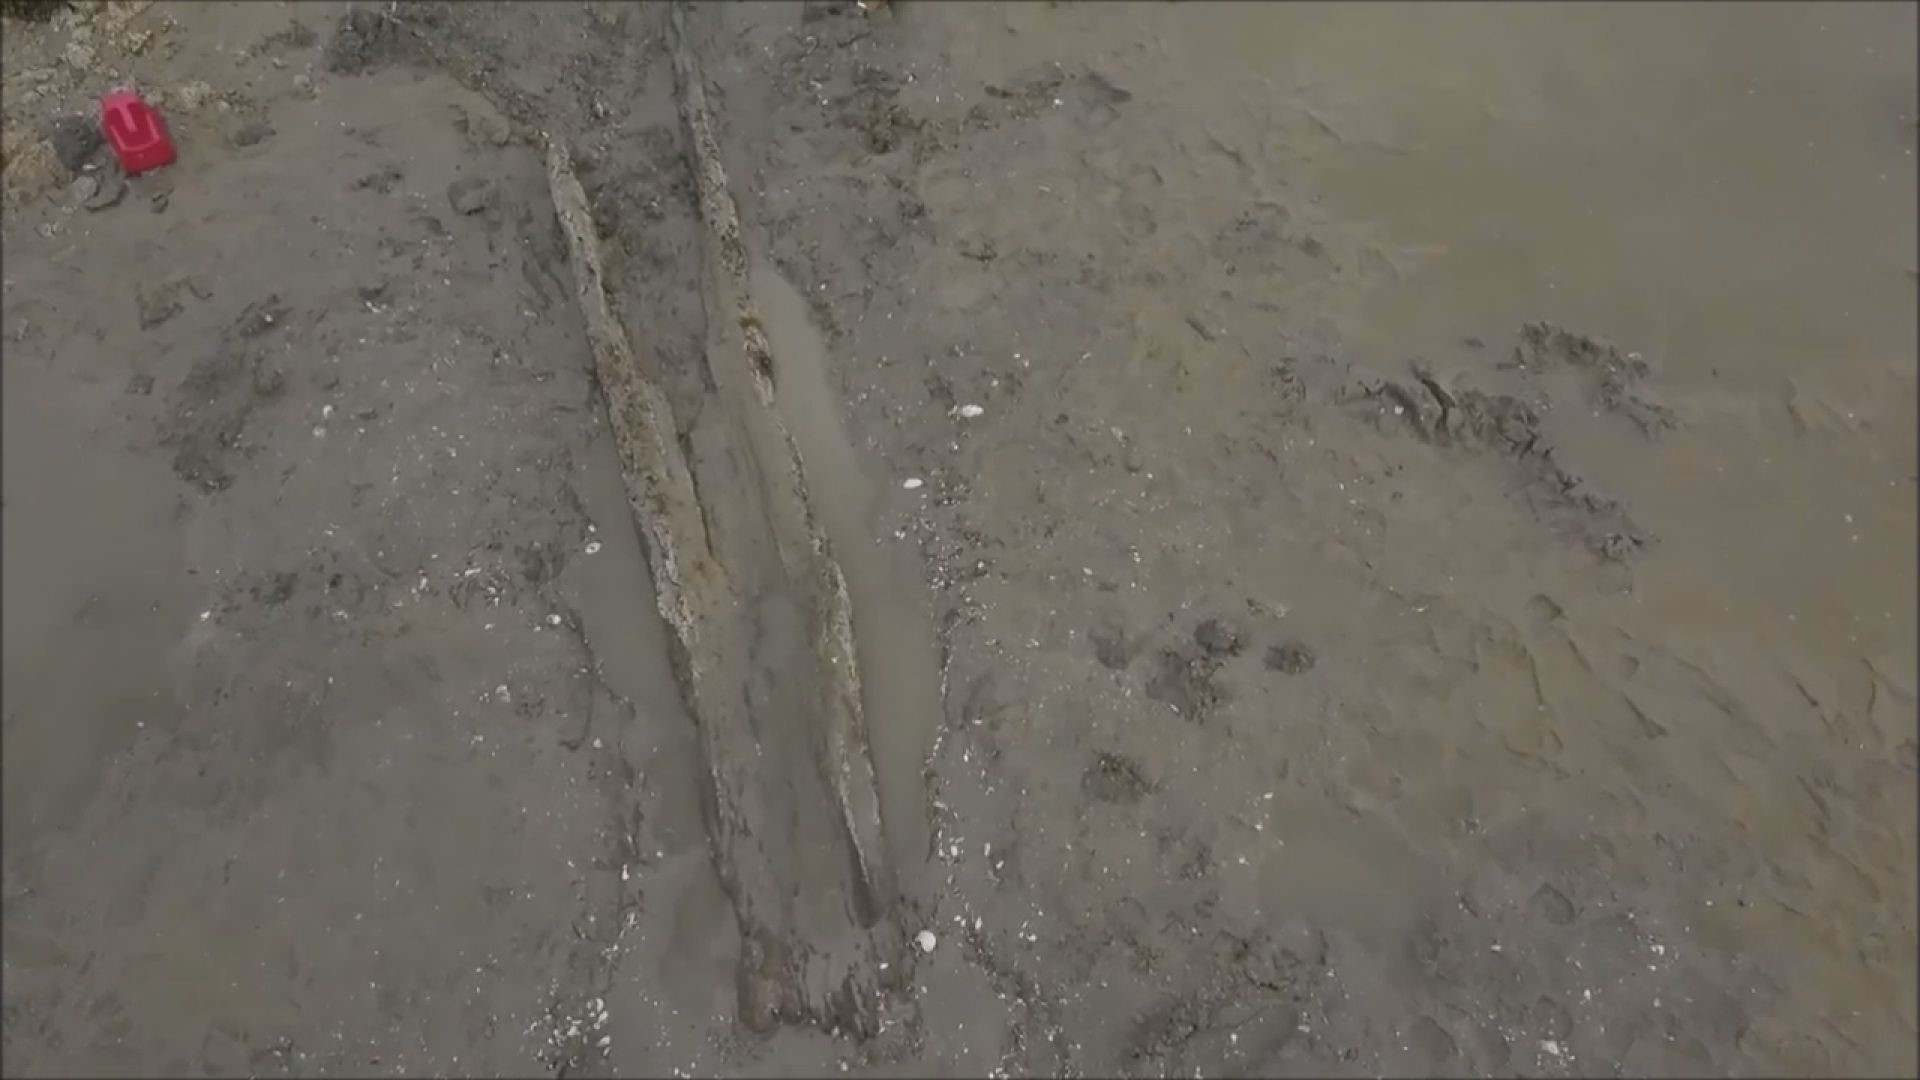 In June 2019, Tim Spahr and other members of Cape Porpoise Archaeological Alliance excavated a 700-year-old dugout canoe found in the mudflats of Cape Porpoise.